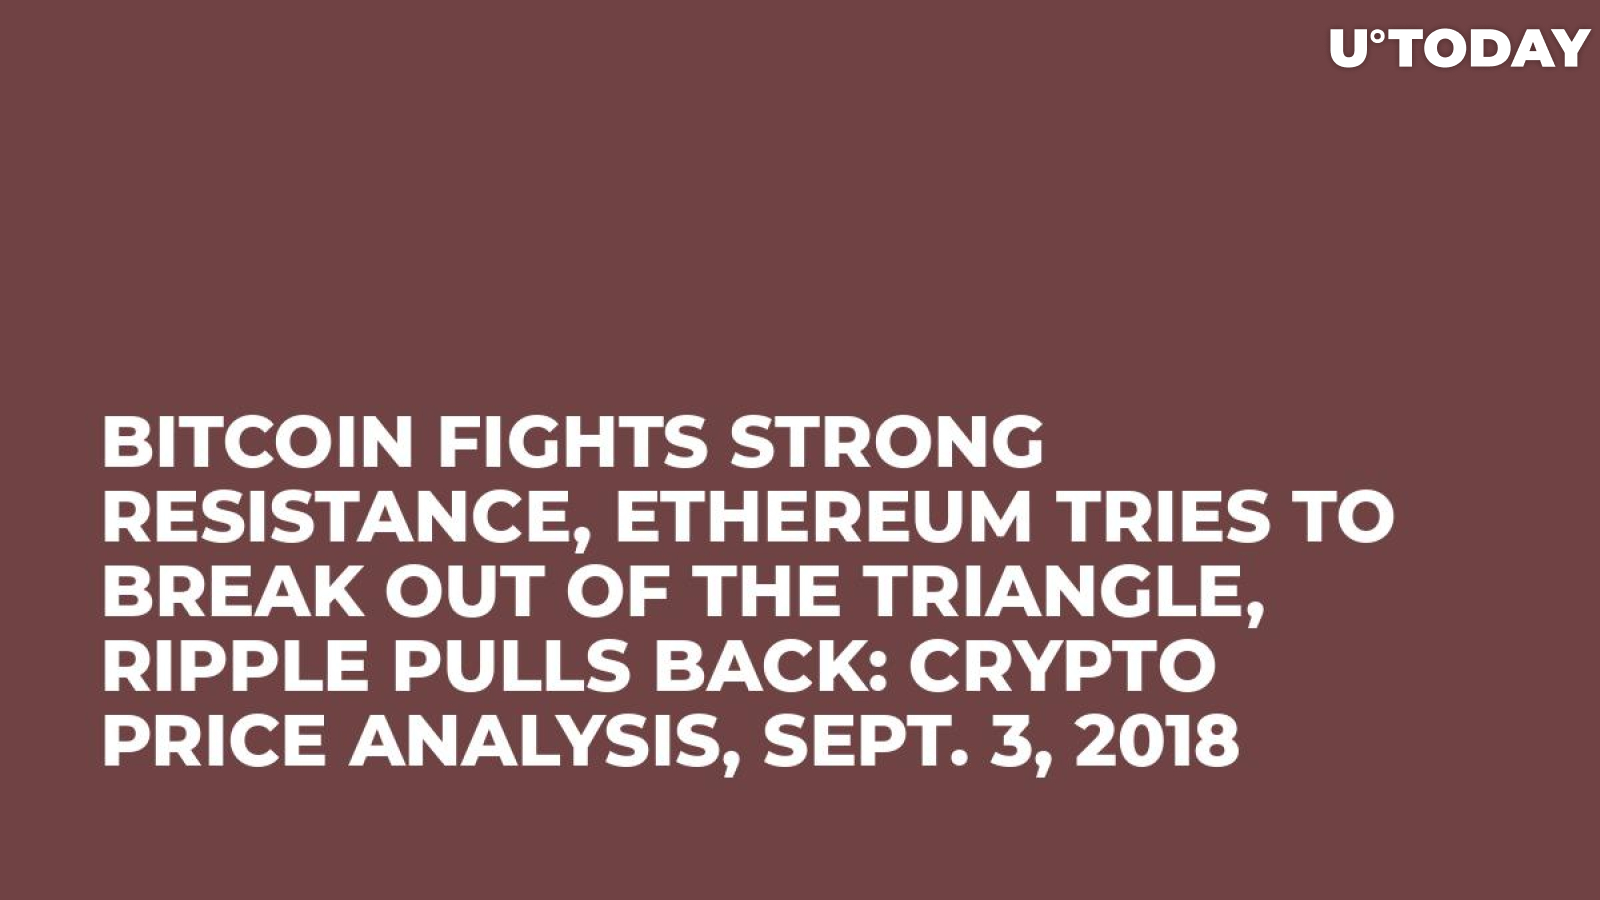 Bitcoin Fights Strong Resistance, Ethereum Tries to Break Out of the Triangle, Ripple Pulls Back: Crypto Price Analysis, Sept. 3, 2018